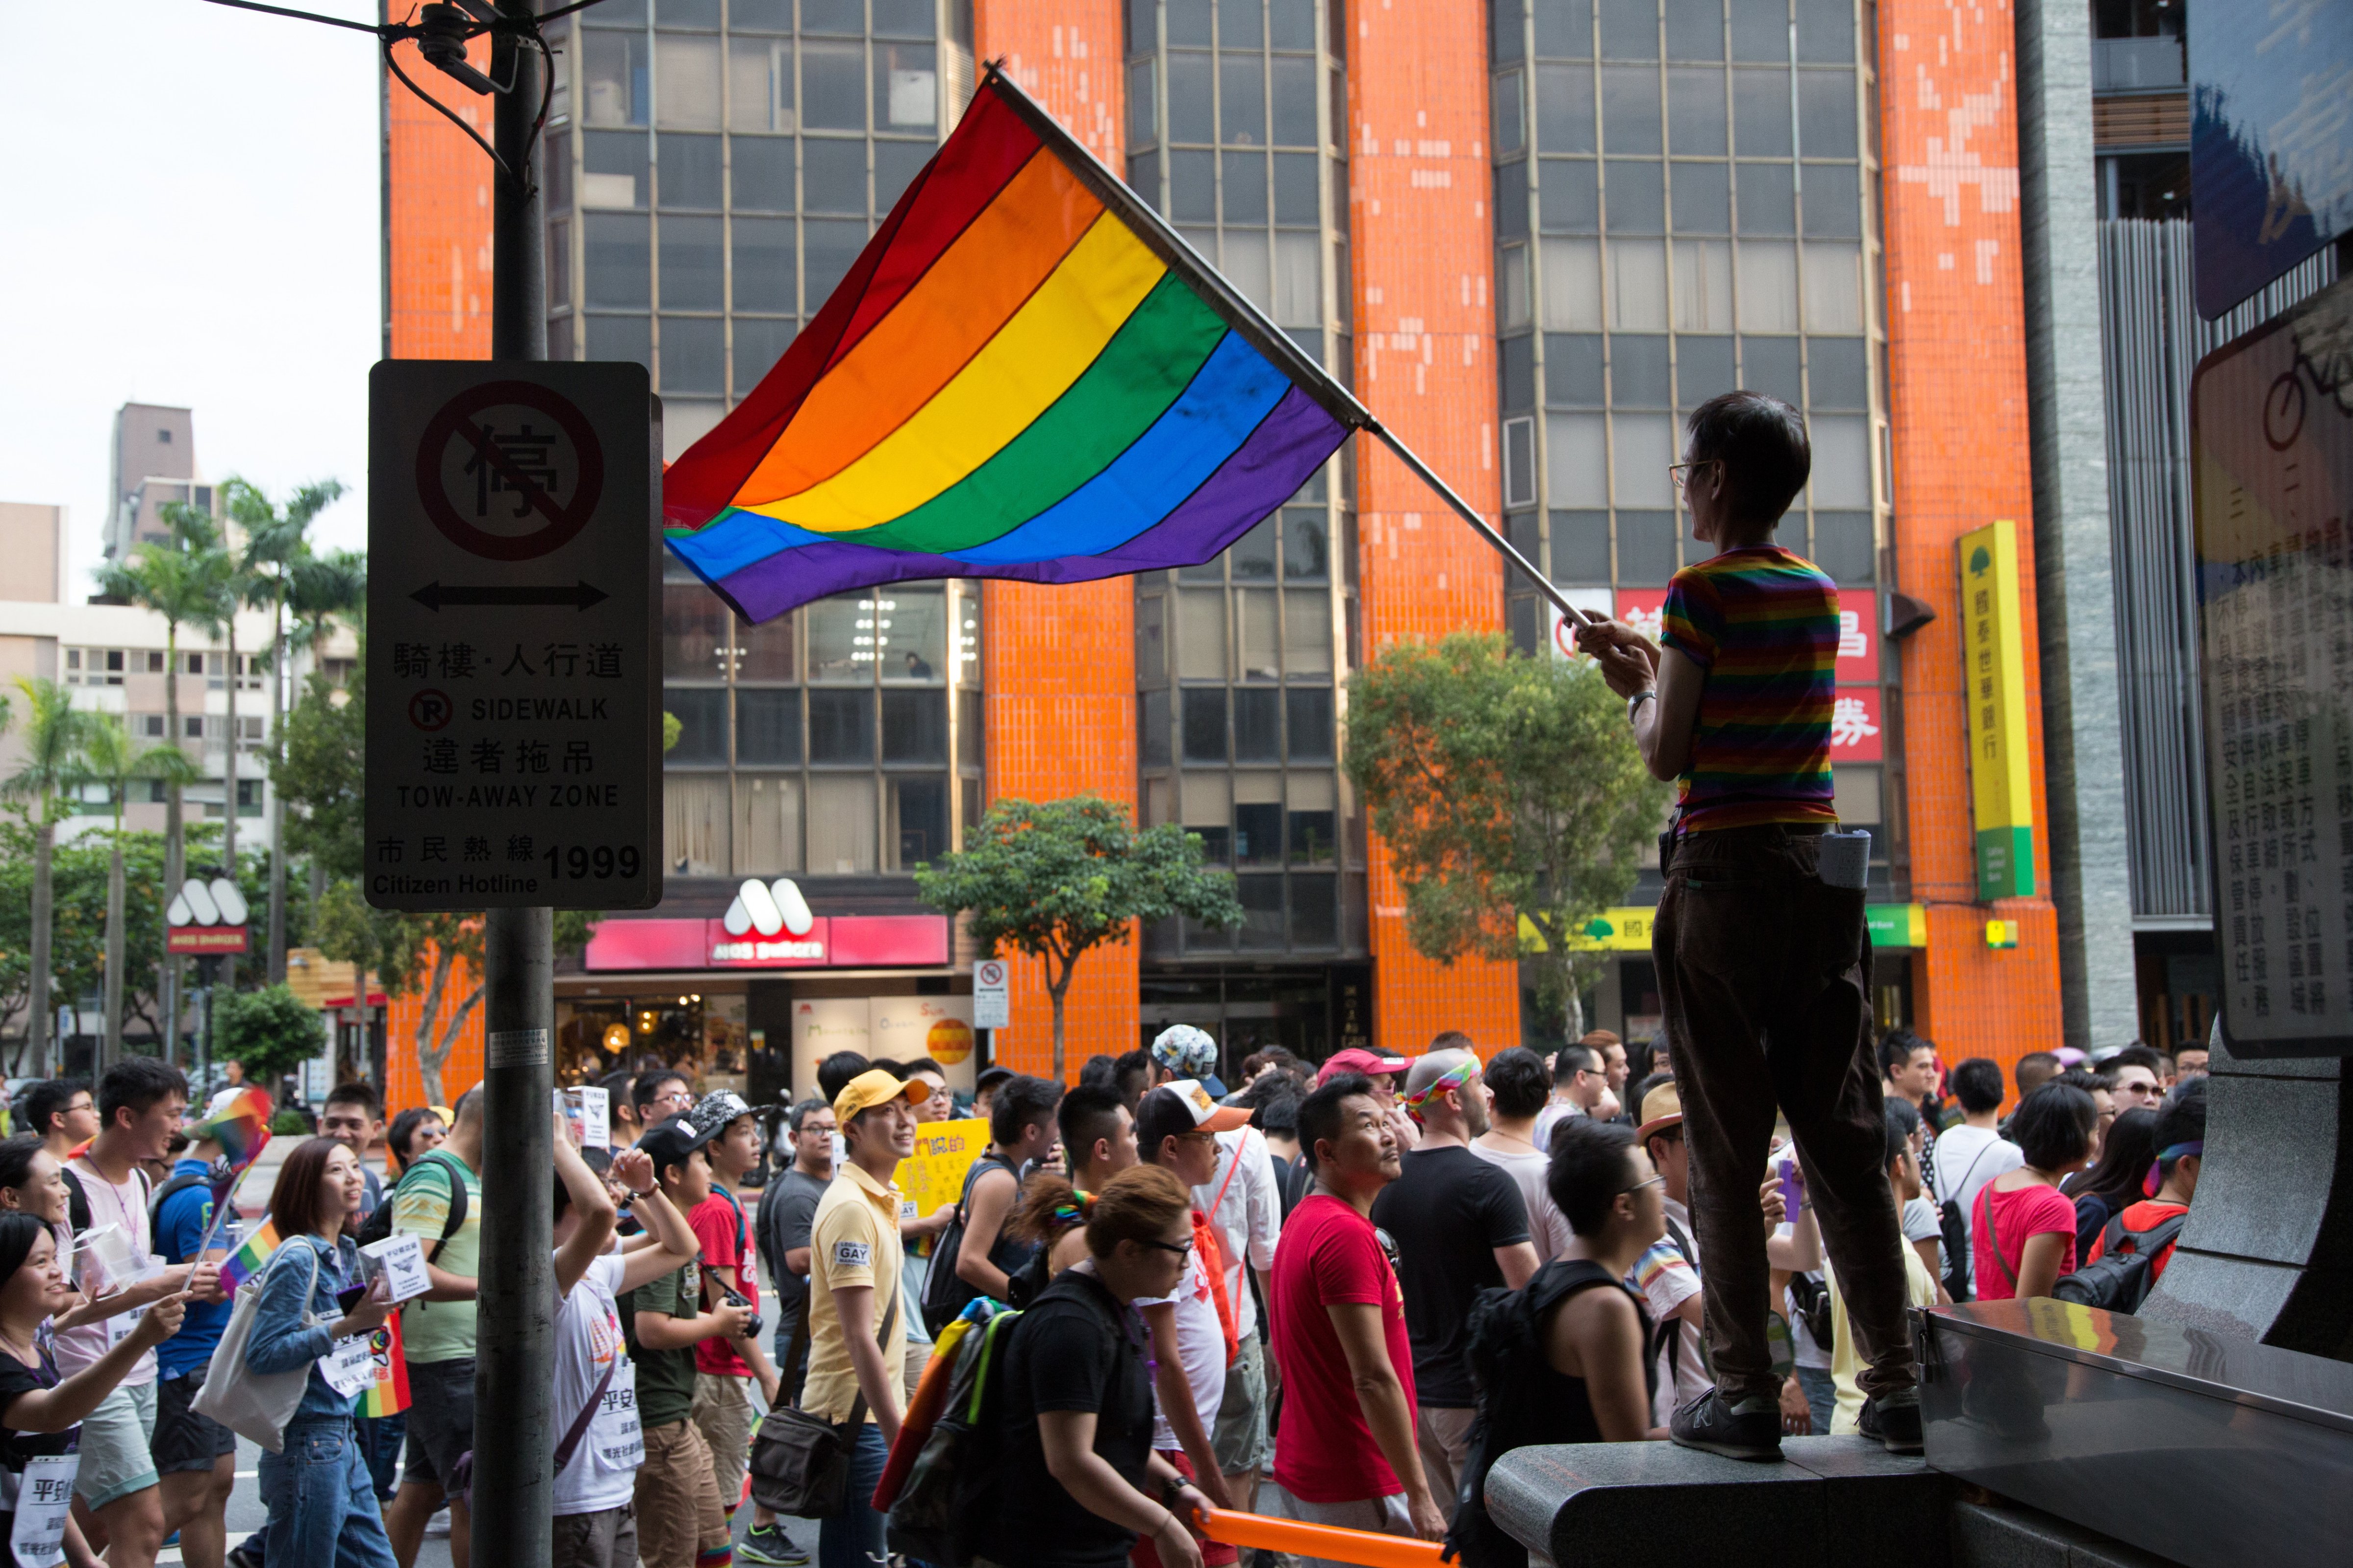 A man waves the LGBT rainbow flag in support of gay marriage